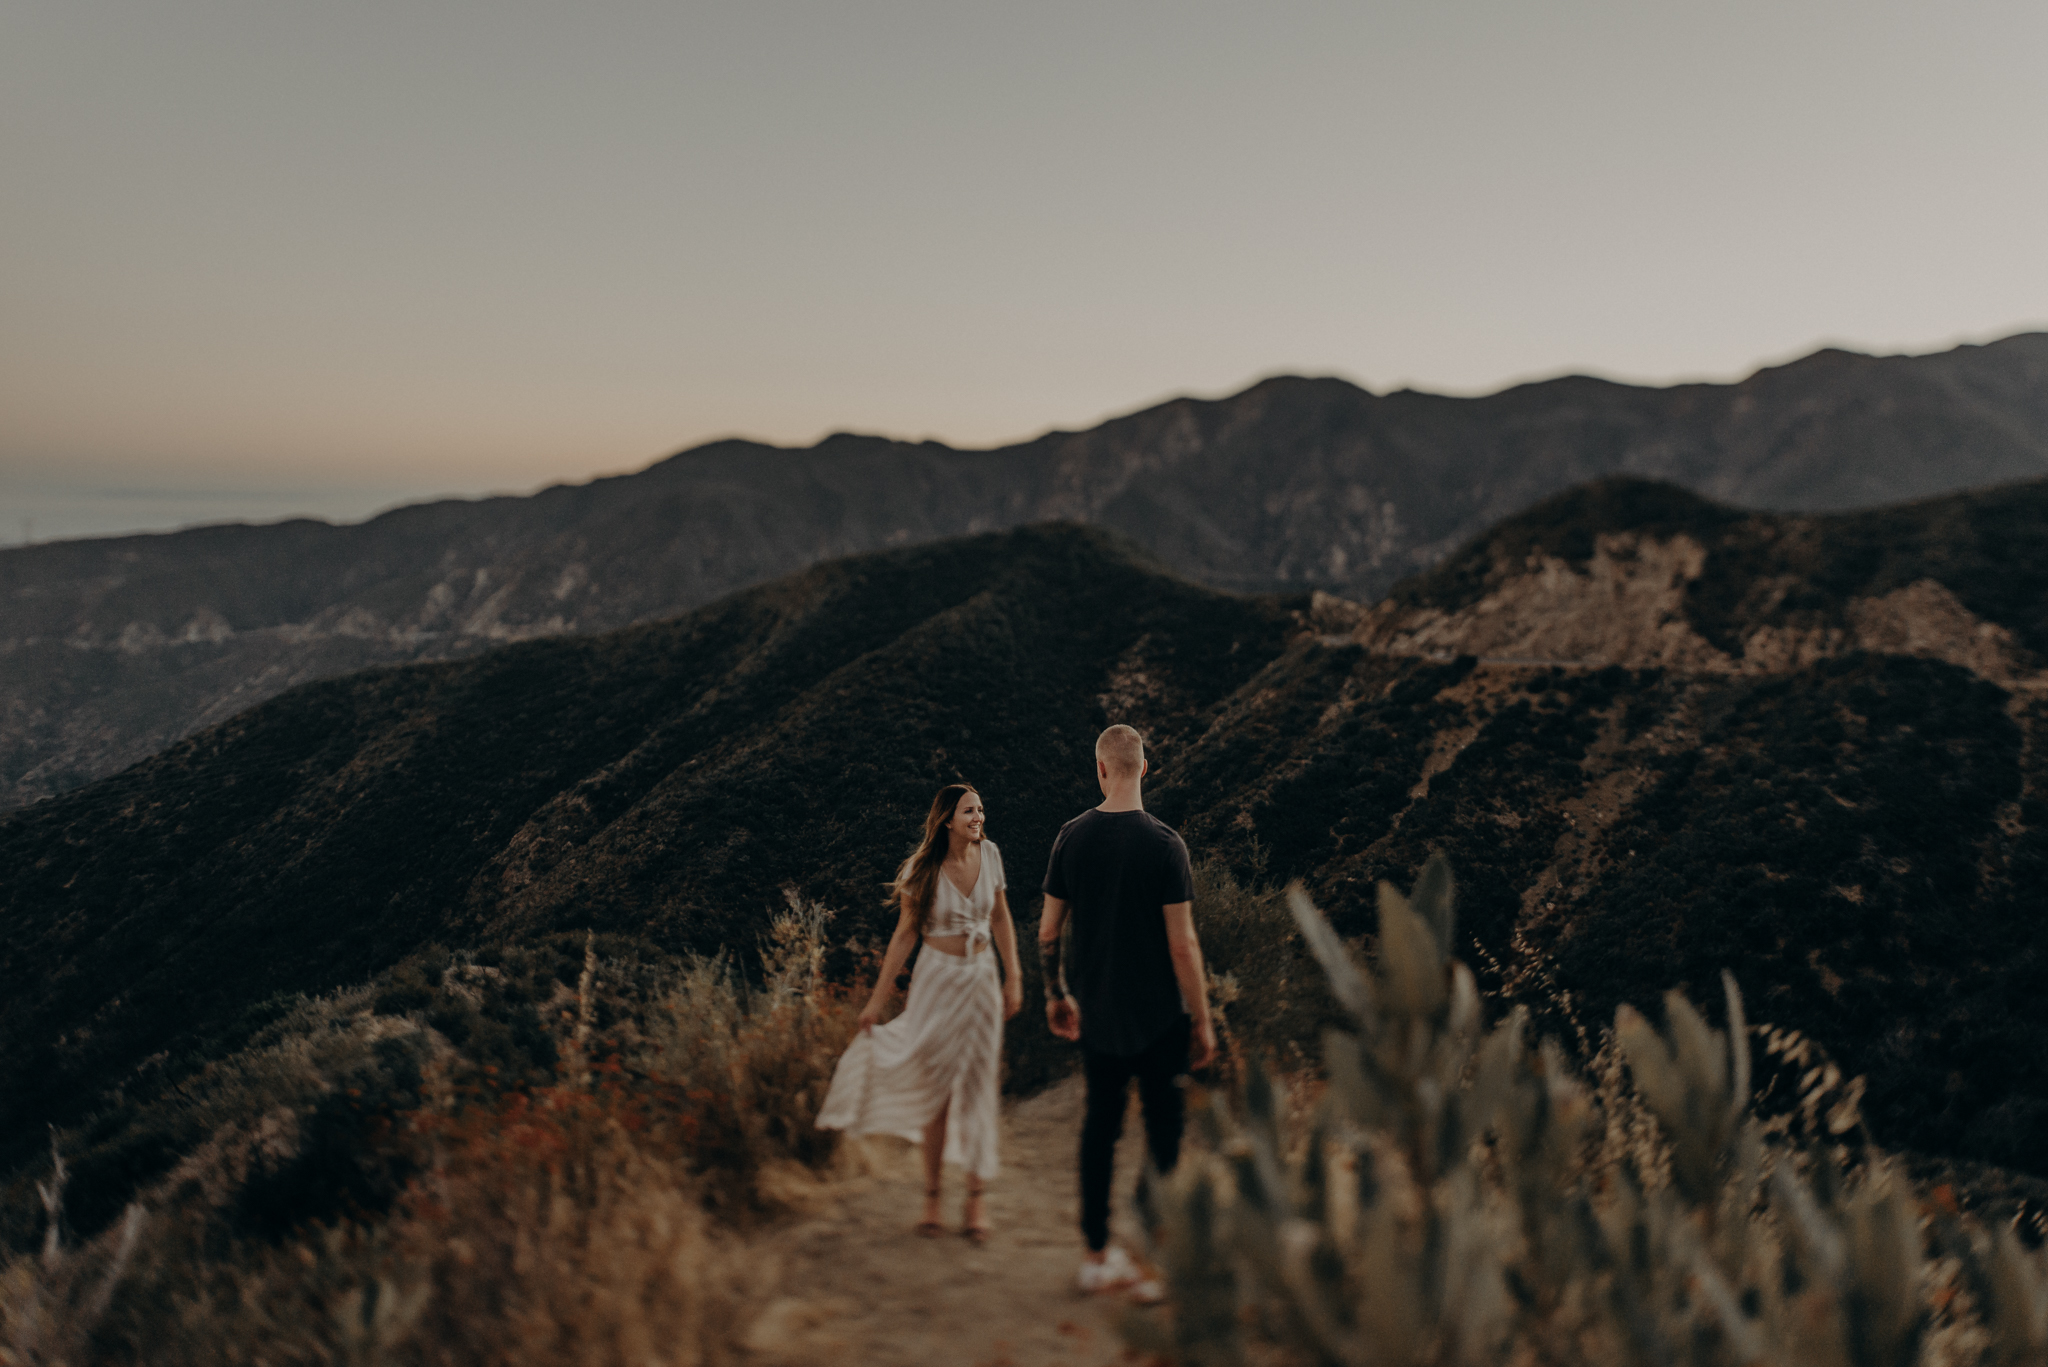 Isaiah + Taylor Photography - Los Angeles Forest Engagement Session - Laid back wedding photographer-037.jpg